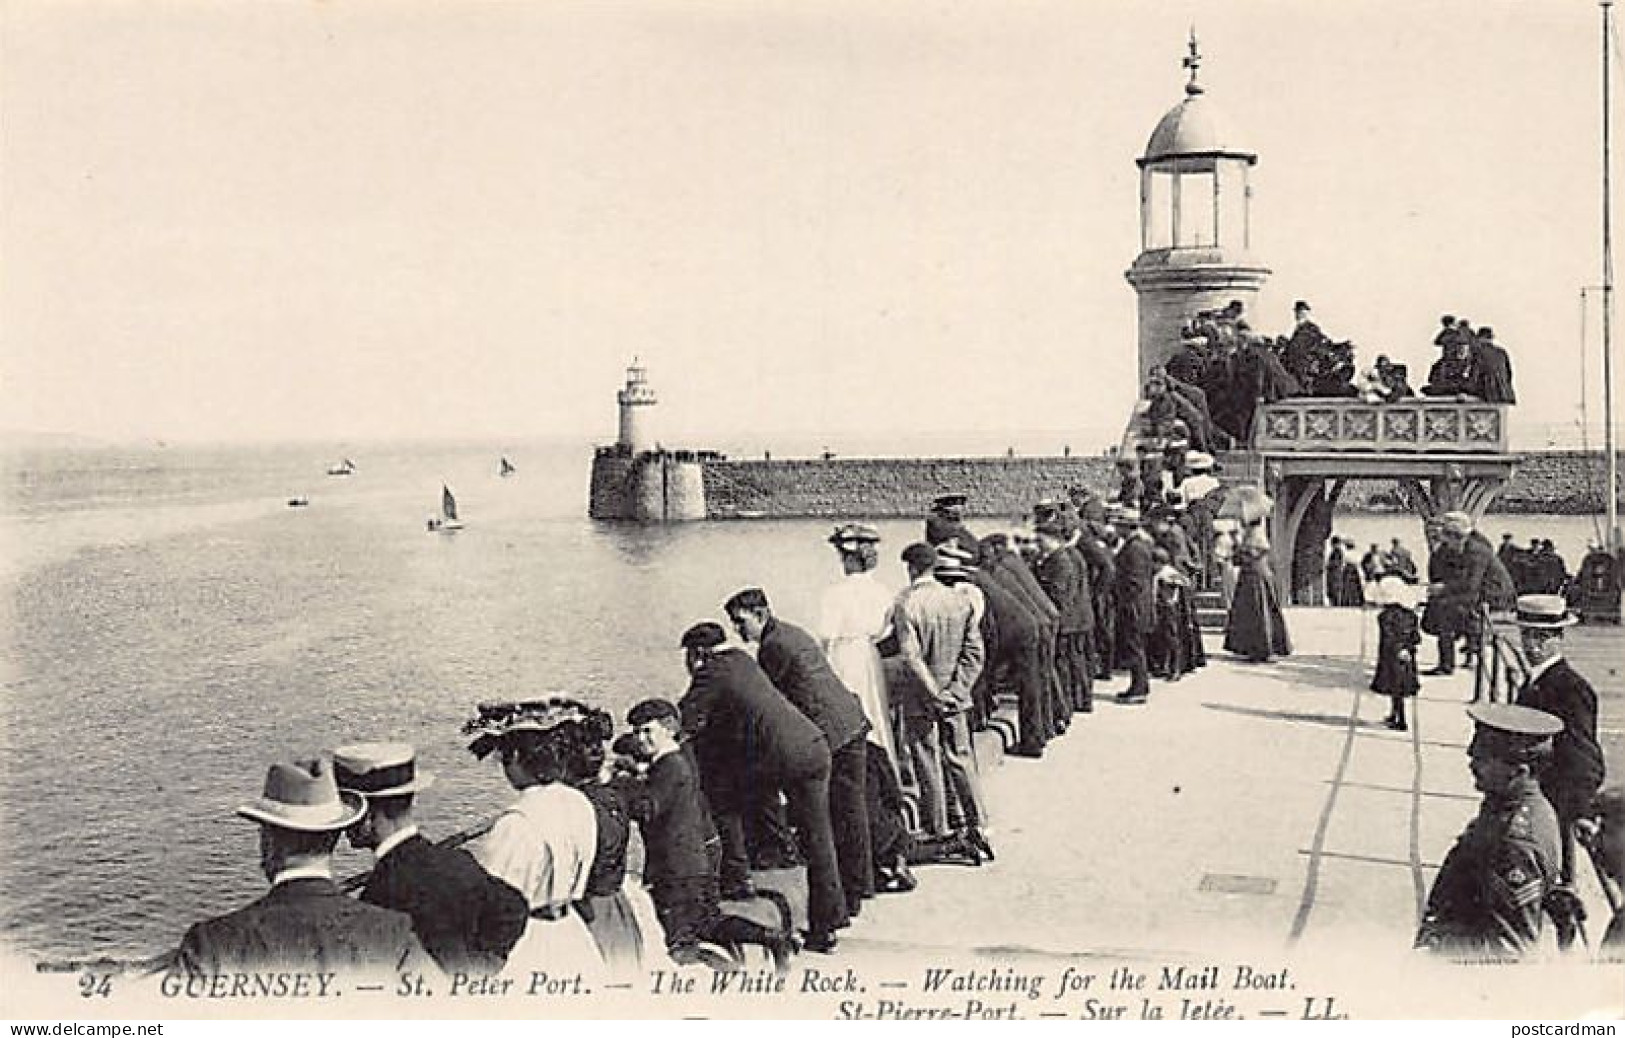 Guernsey - ST. PETER PORT - The White Rock - Watching For The Mail Boat - Publ. Levy L.L. 24 - Guernsey